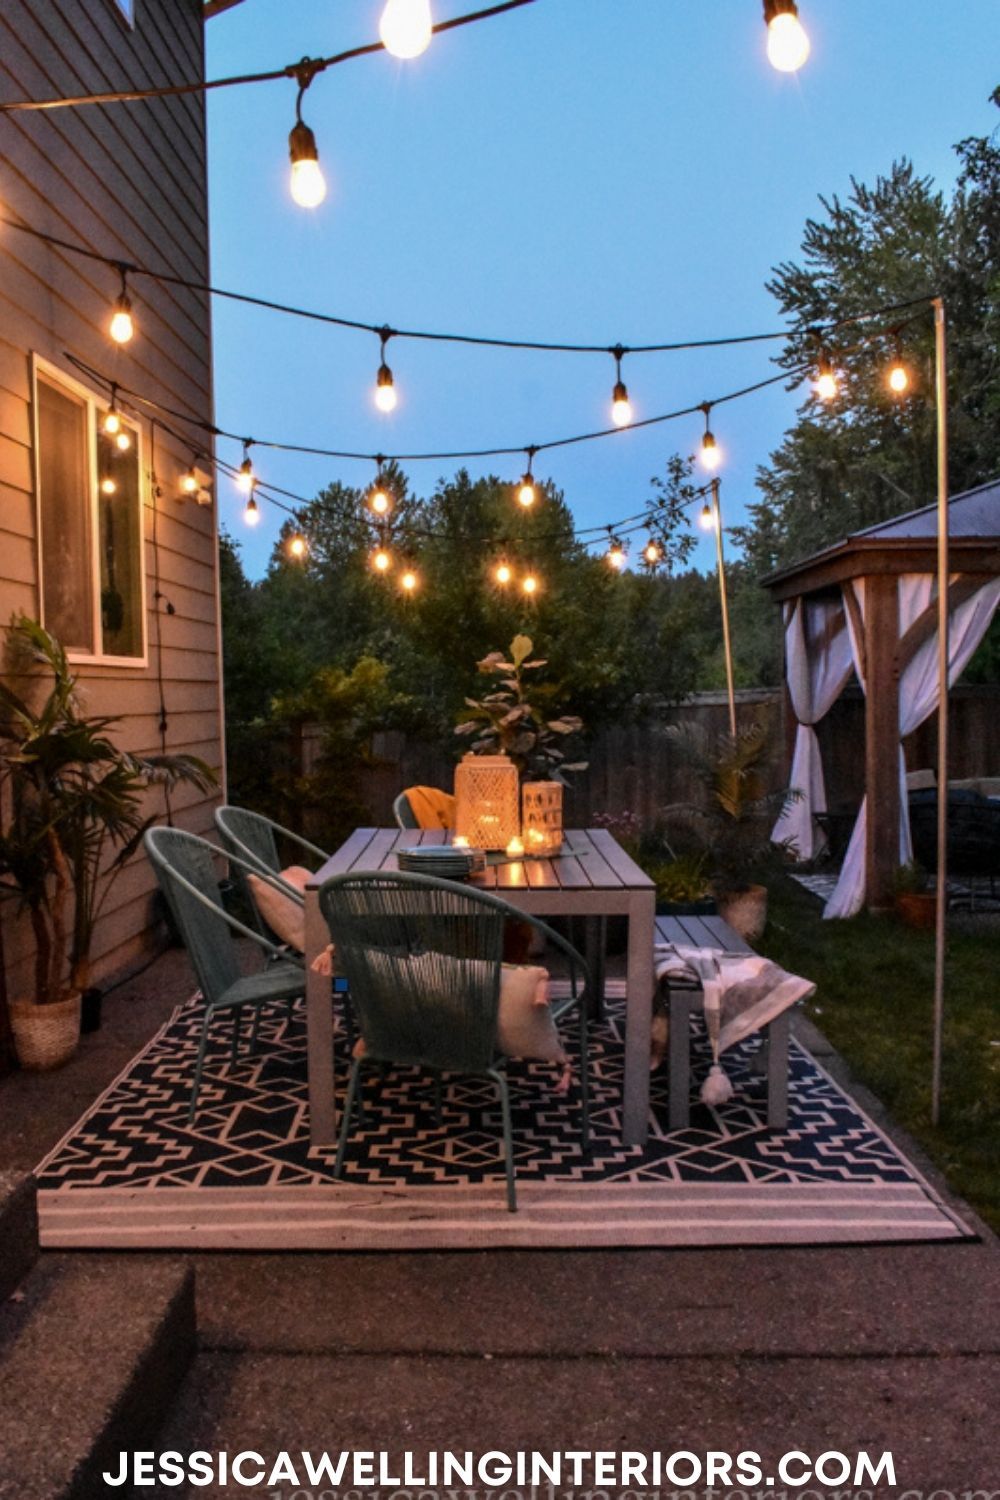 Patio Yard String Lights Brighten Up Your Outdoor Space with Beautiful Yard Lighting